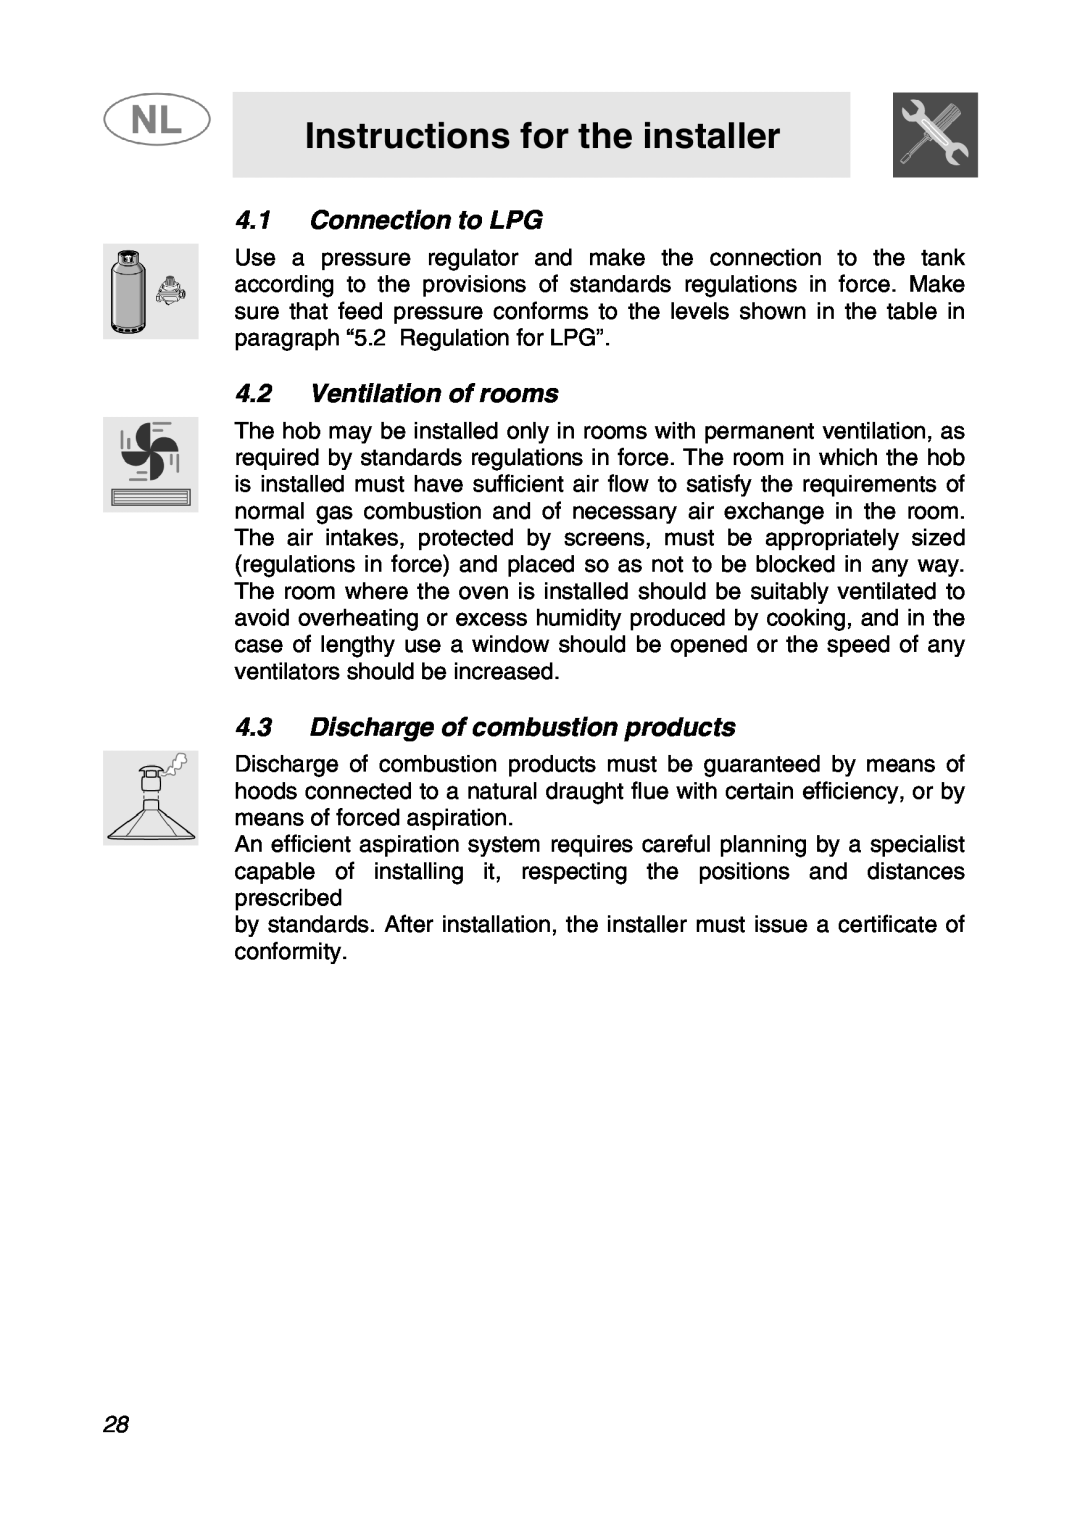 Smeg SNL574GH Connection to LPG, Ventilation of rooms, Discharge of combustion products, Instructions for the installer 